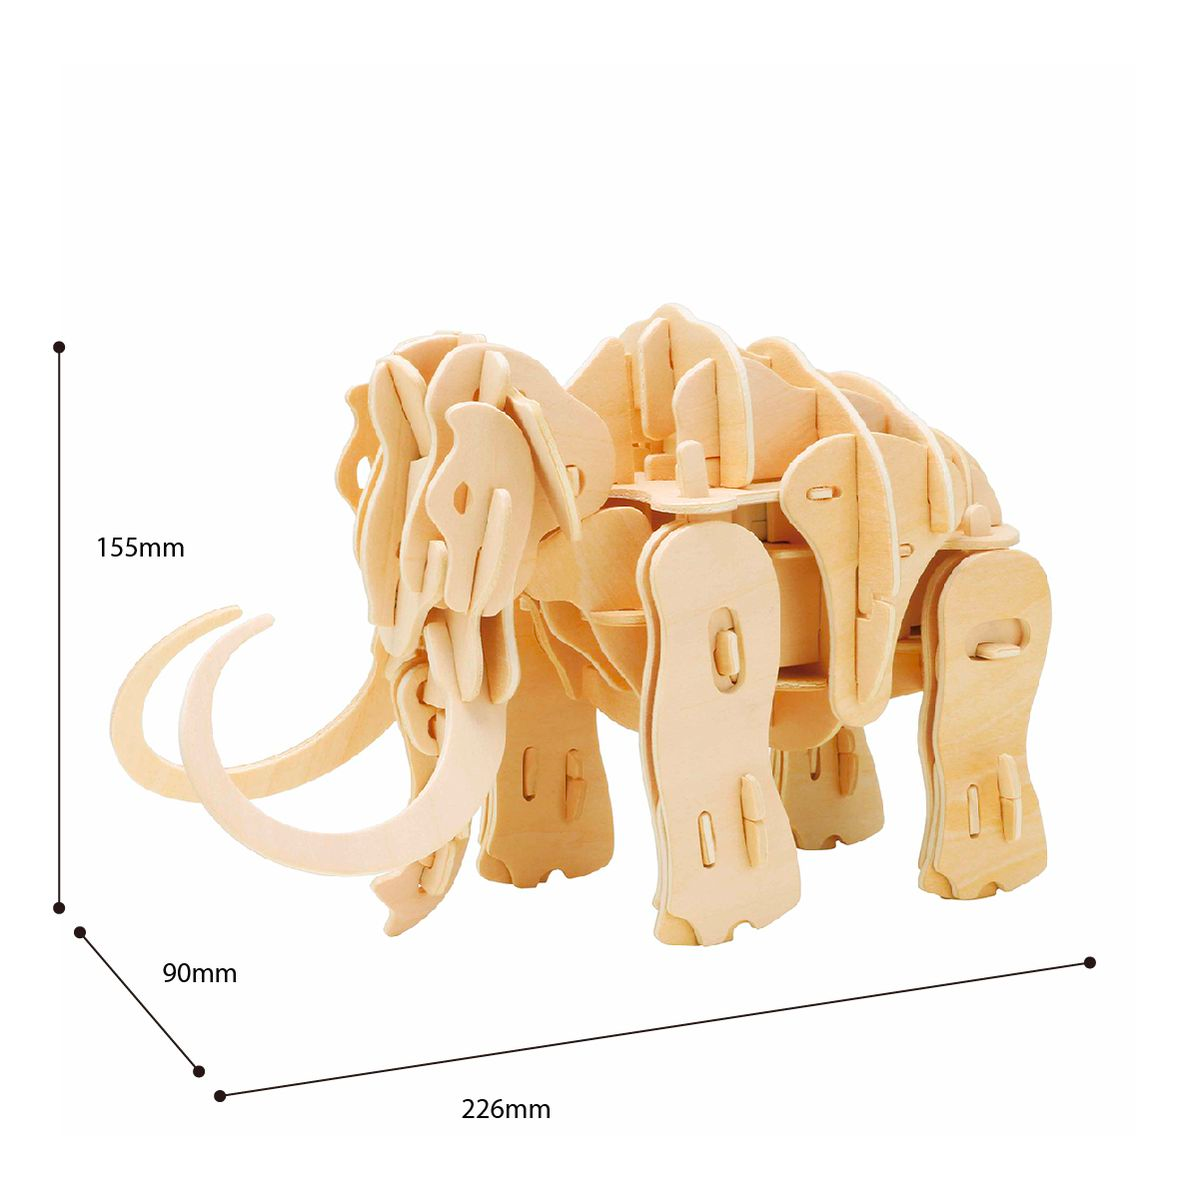 Robotime Mammoth Animal Modern 3D Wooden Puzzle